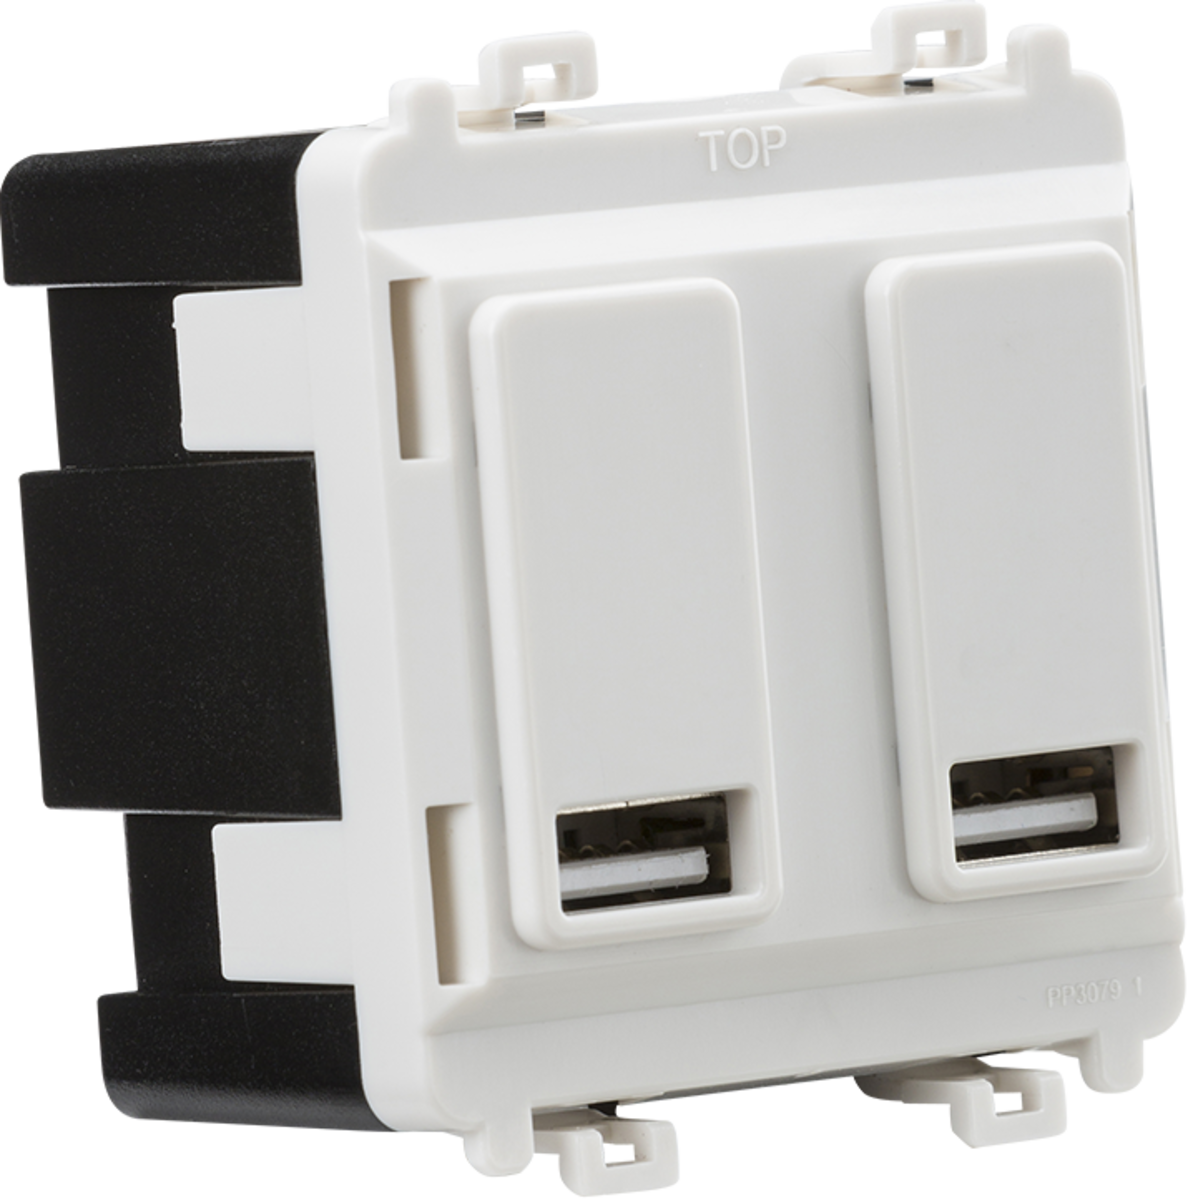 Dual USB charger module (2 x grid positions) 5V 2.4A (shared) - white